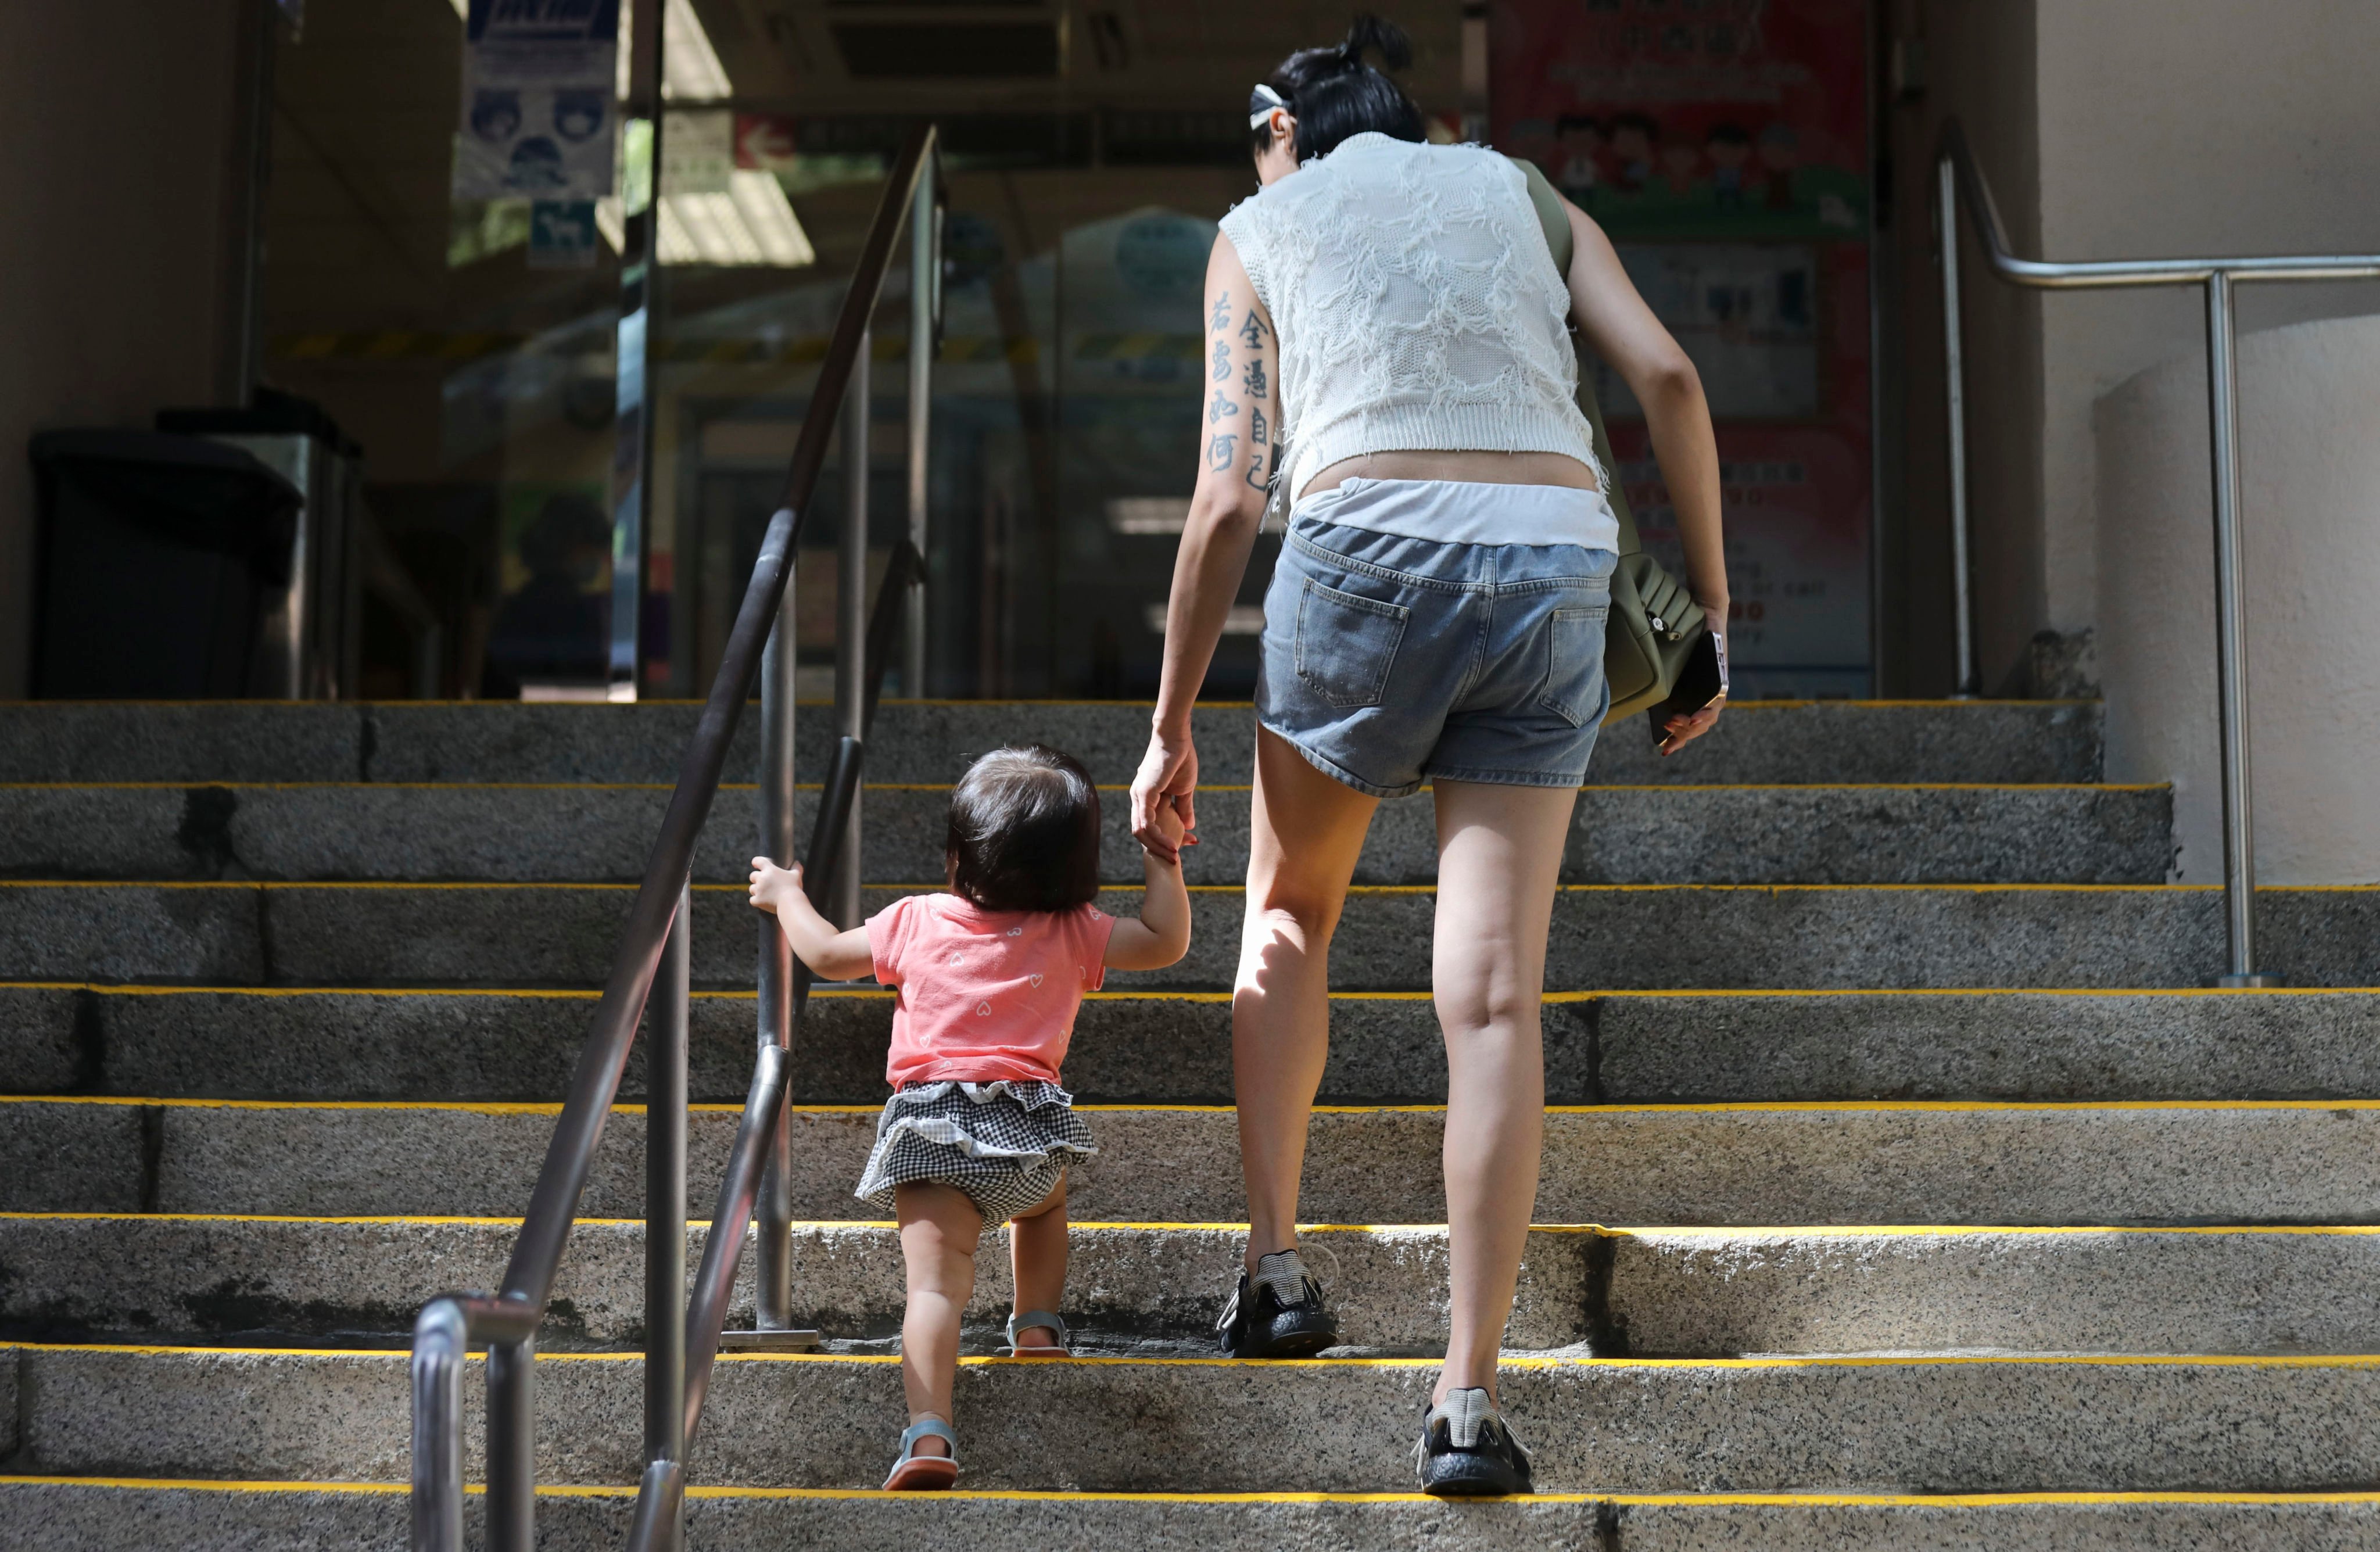 A woman with a toddler enters Tsan Yuk Hospital in Sai Ying Pun on August 15. Hong Kong’s fertility rate has hit a record low, sparking calls for reforms to provide more support to young families and make the city more family-friendly. Photo: Xiaomei Chen